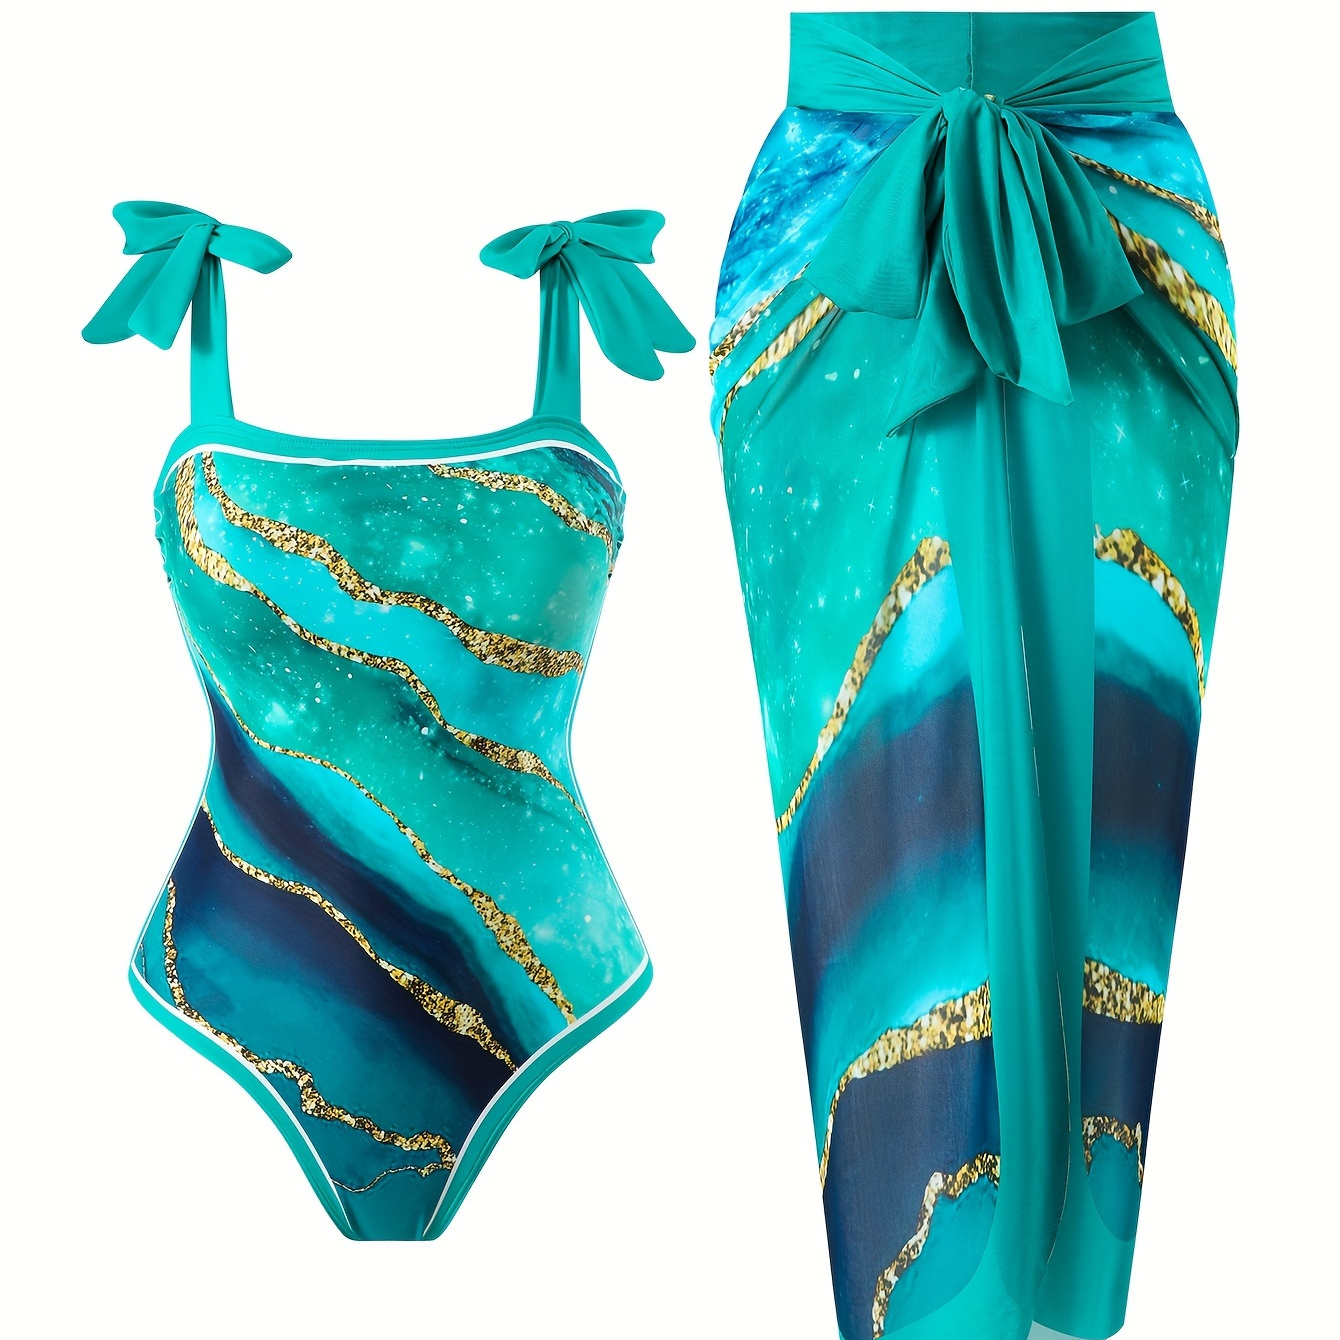 

Marble Print Elegant 2 Piece Swimsuits, Tie Shoulder One-piece Bathing-suit & Cover Up Skirt, Women's Swimwear & Clothing